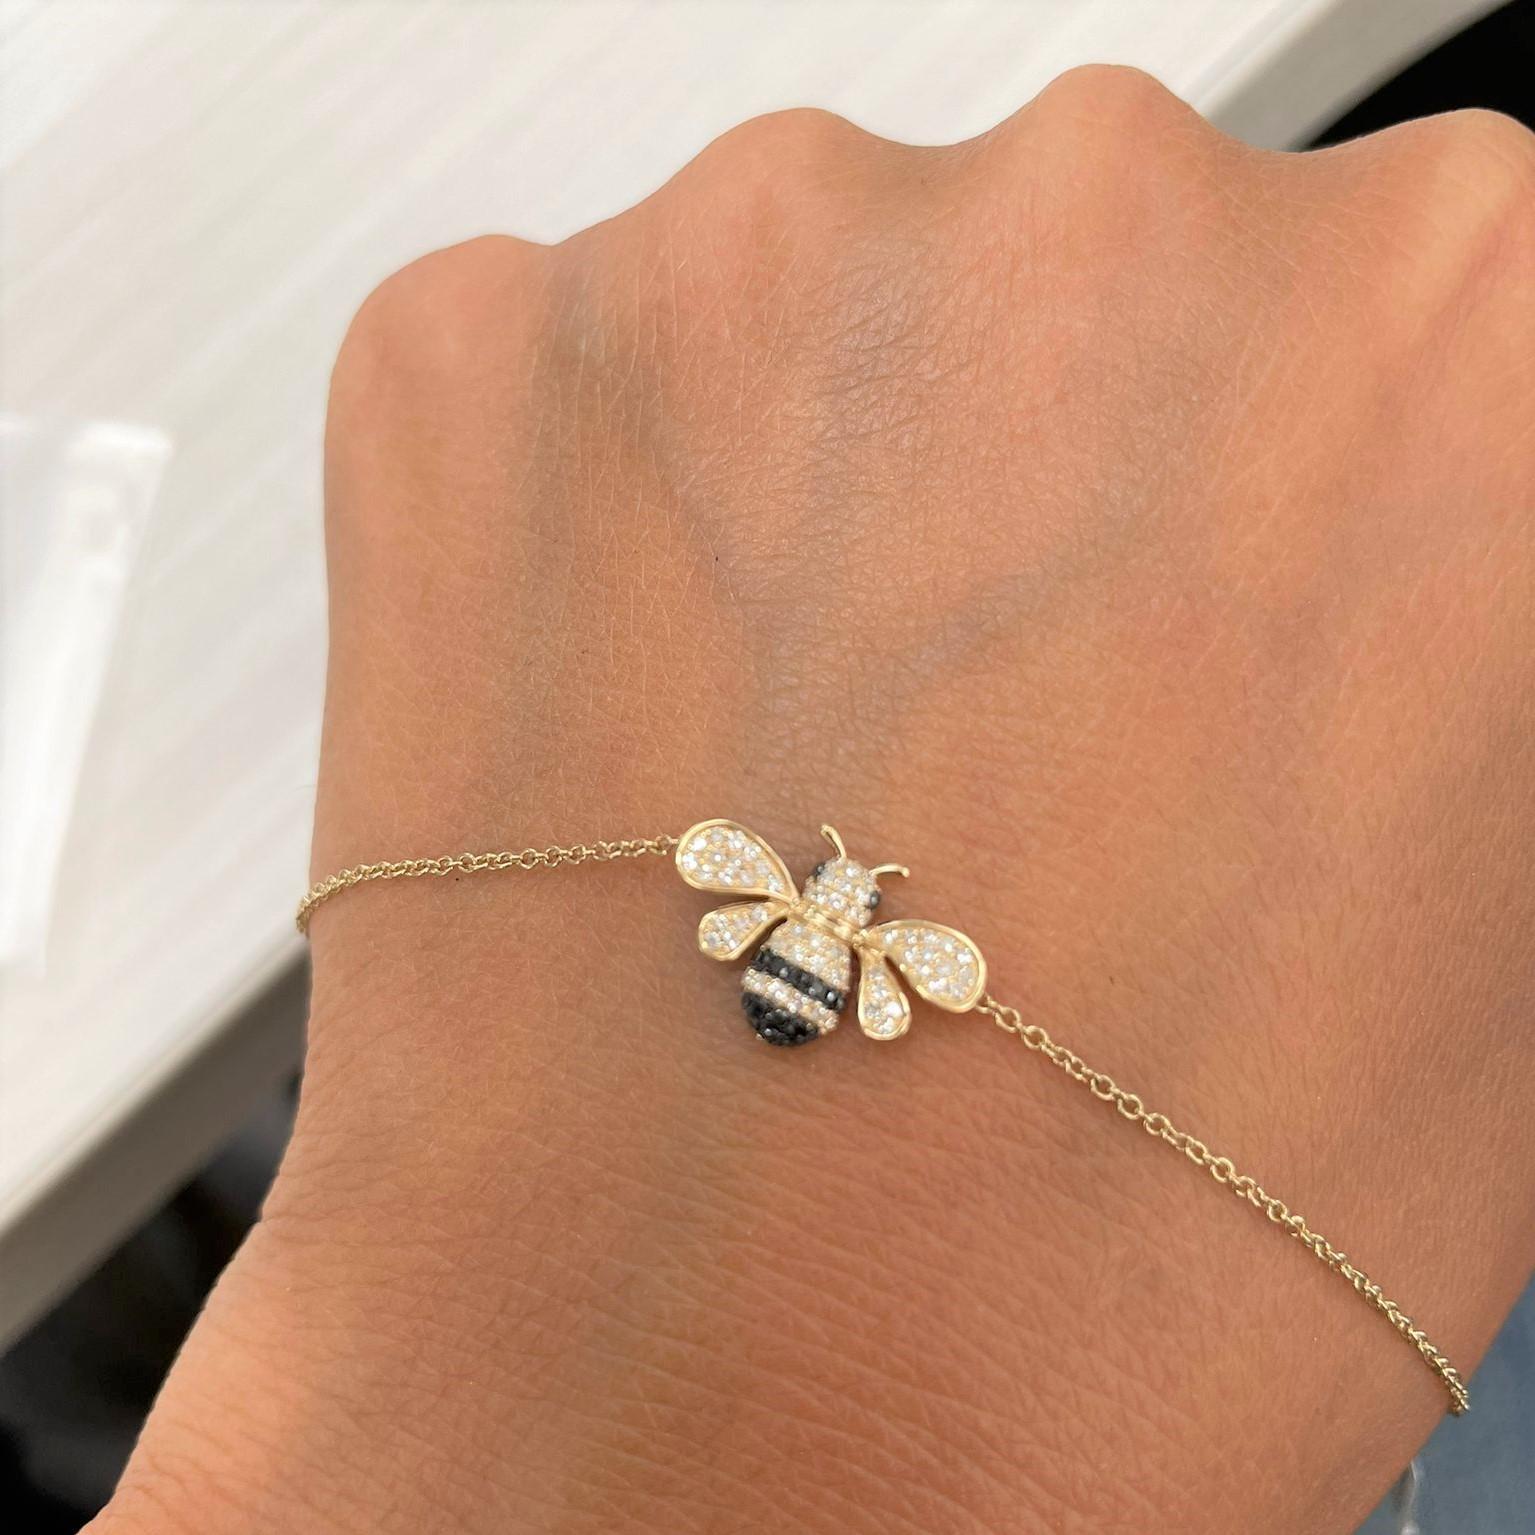 Diamond Bumble Bee Bracelet: Focused on design and detail, this adorable diamond bumble bee bracelet will have heads turn! Crafted of 14K Gold features 0.14ct Natural Diamonds and 0.06 cts of Black Diamonds and is offered in 14k yellow or rose gold.